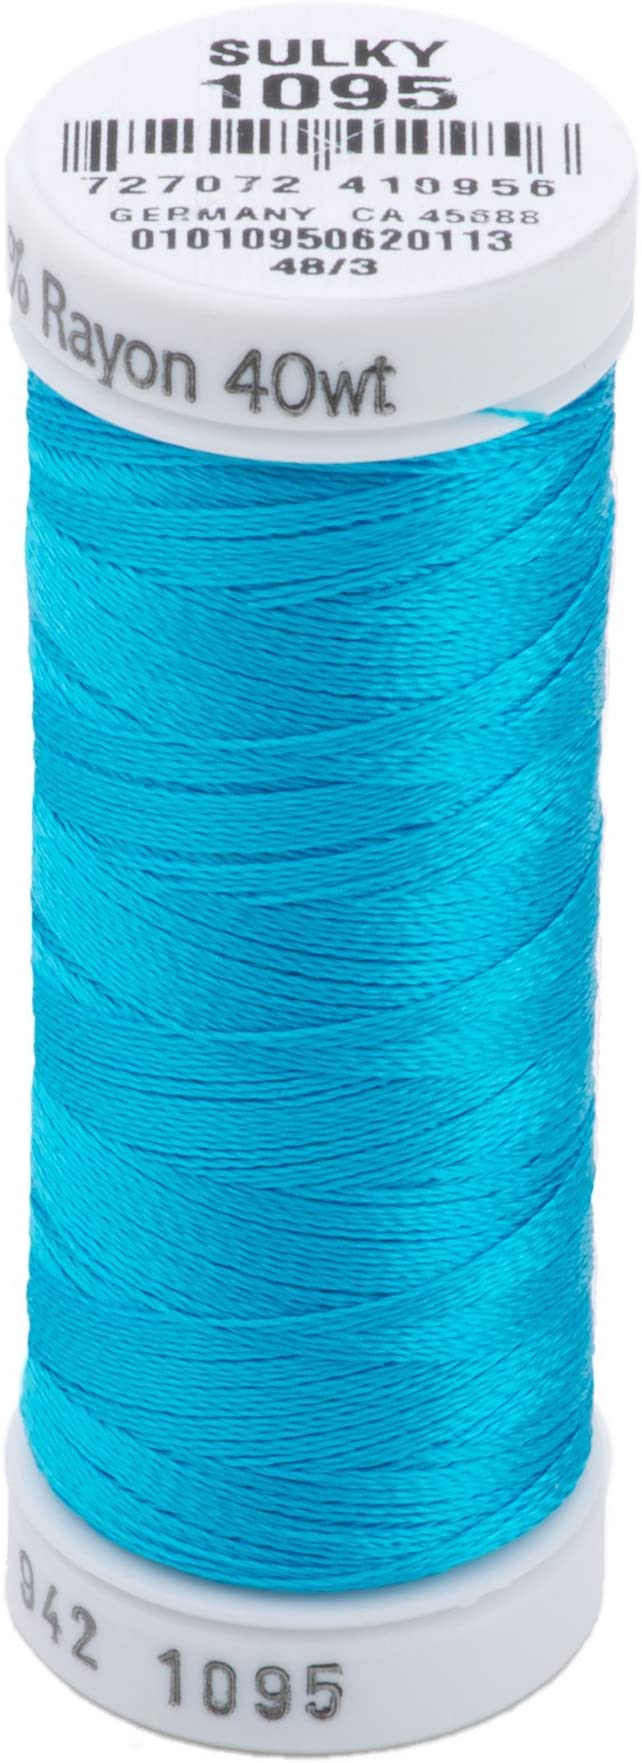 Sulky Rayon Thread for Sewing, 250-Yard, Turquoise